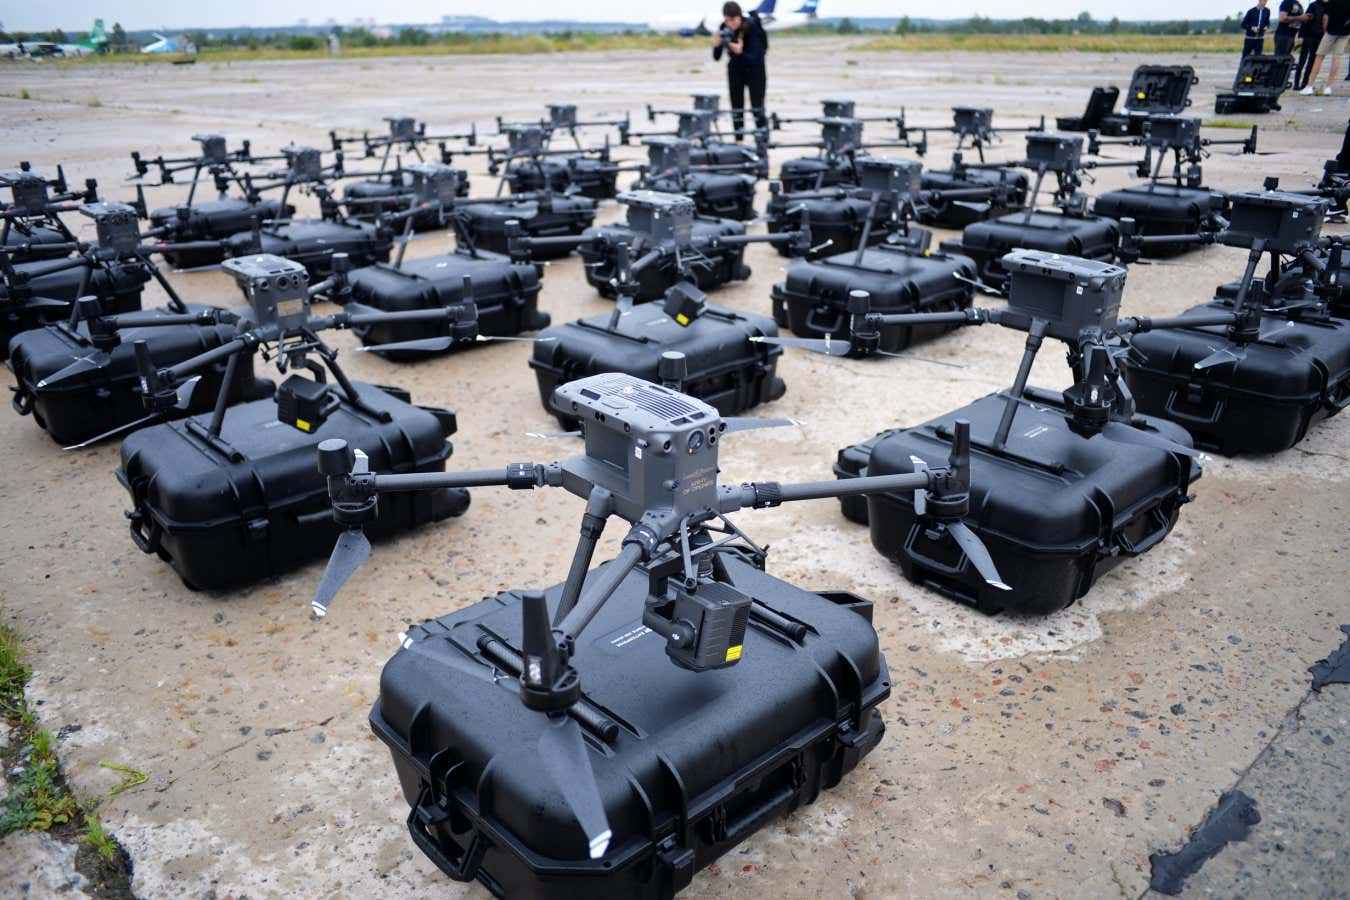 30 DJI Matrice 300 RTK drones purchased for the armed forces of Ukraine